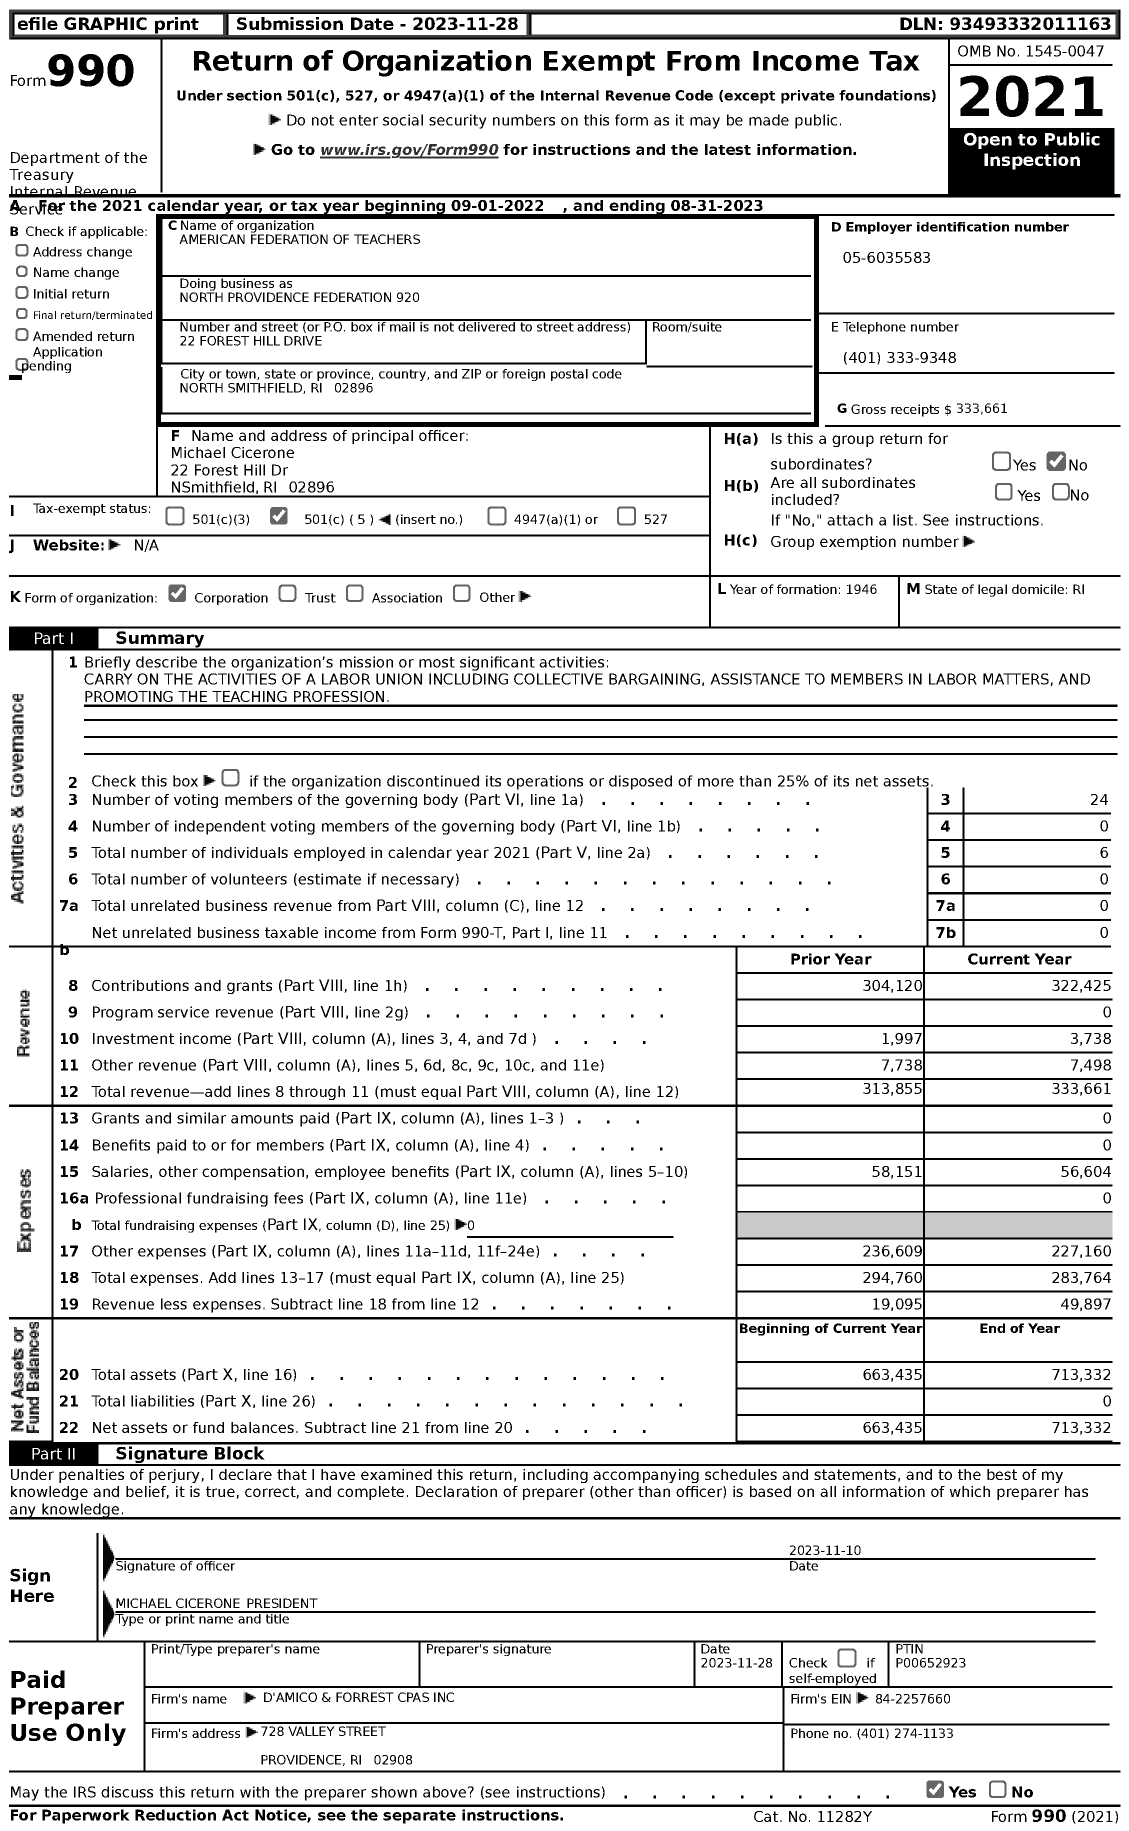 Image of first page of 2022 Form 990 for American Federation of Teachers - 0920 North Providence Fed